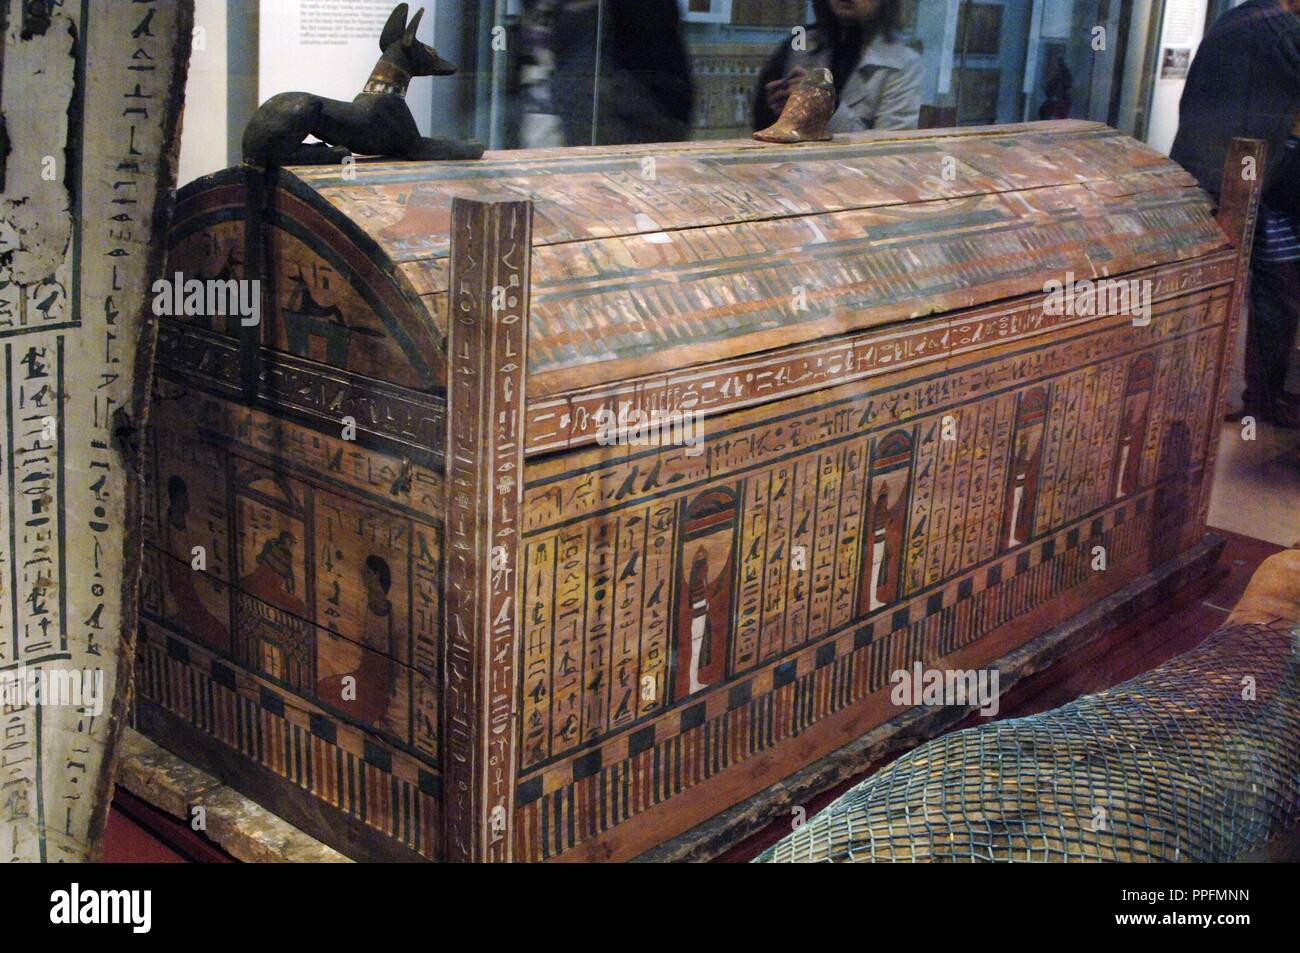 Outer sarcophagus of the priest Hor. 7th century BC. 25th Dynasty. Late Period. From the tomb of Hor. Probably from Deir el-Bahari, Thebes (Egypt). British Museum. London. United Kingdom. Stock Photo